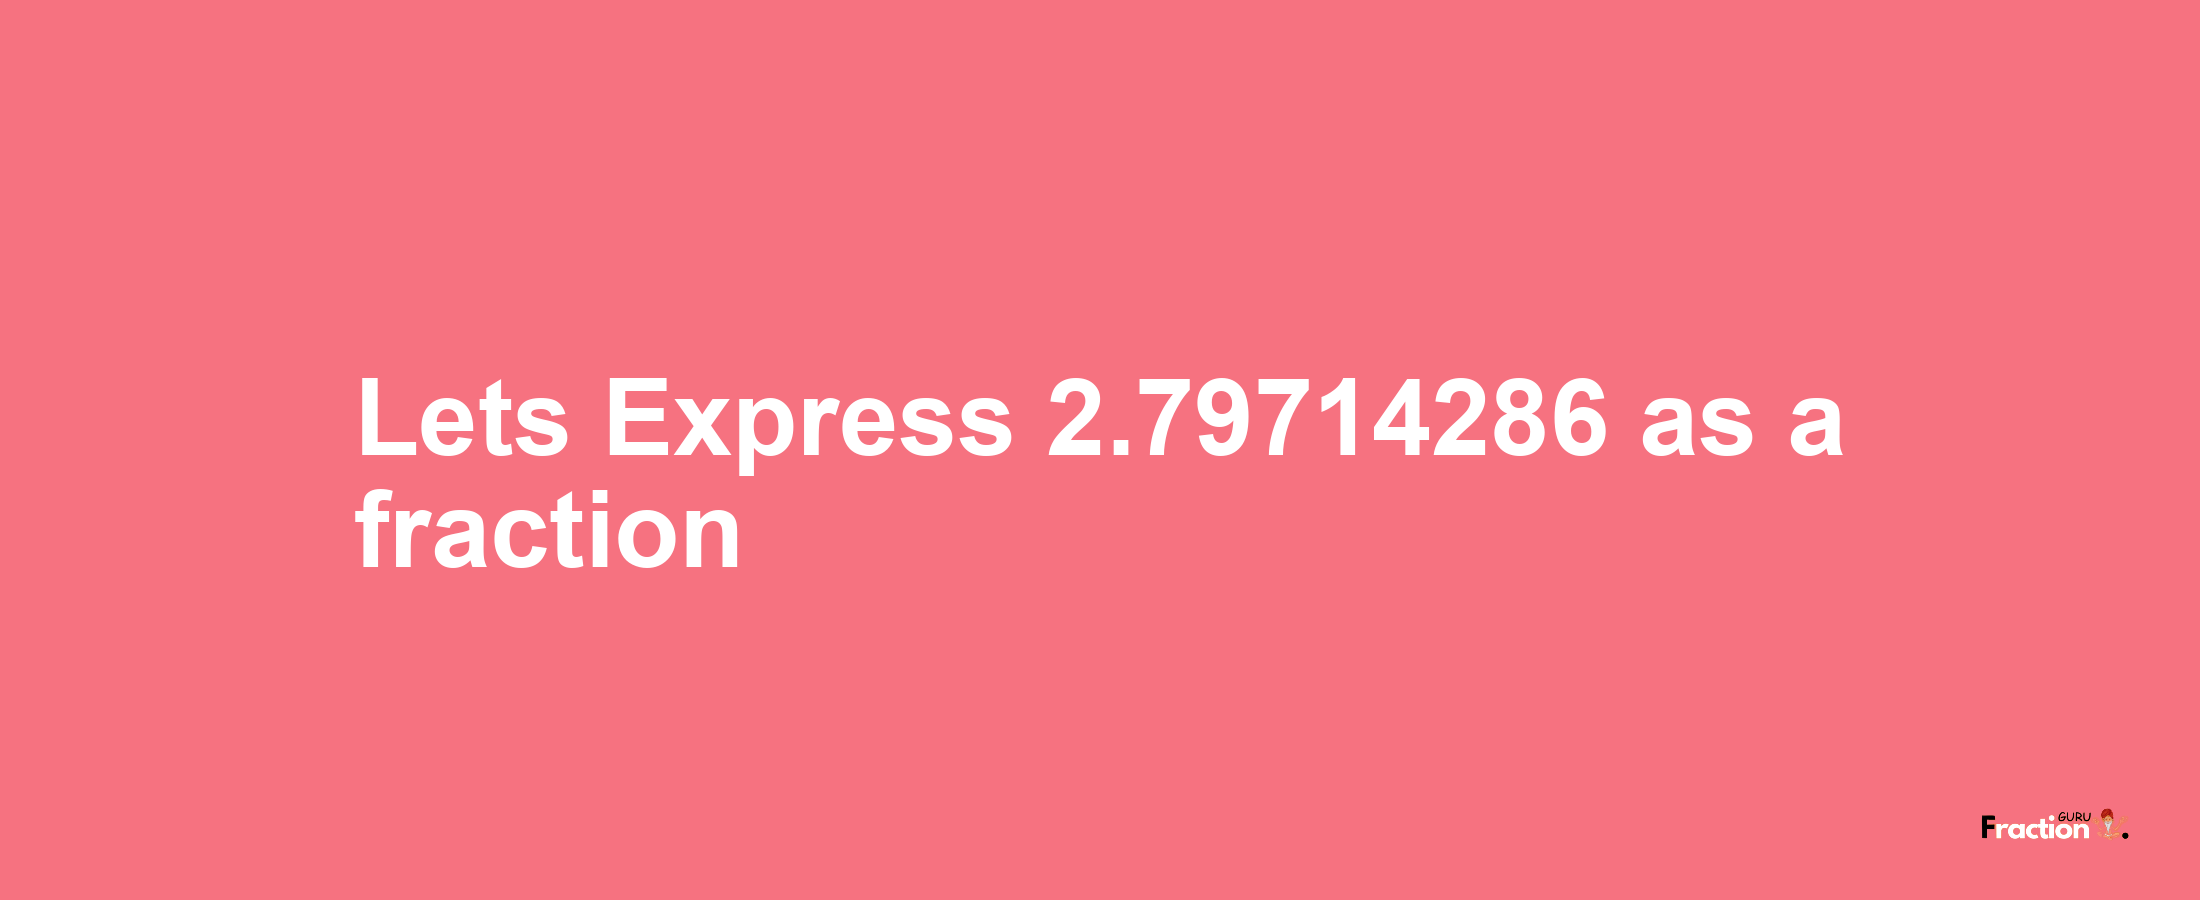 Lets Express 2.79714286 as afraction